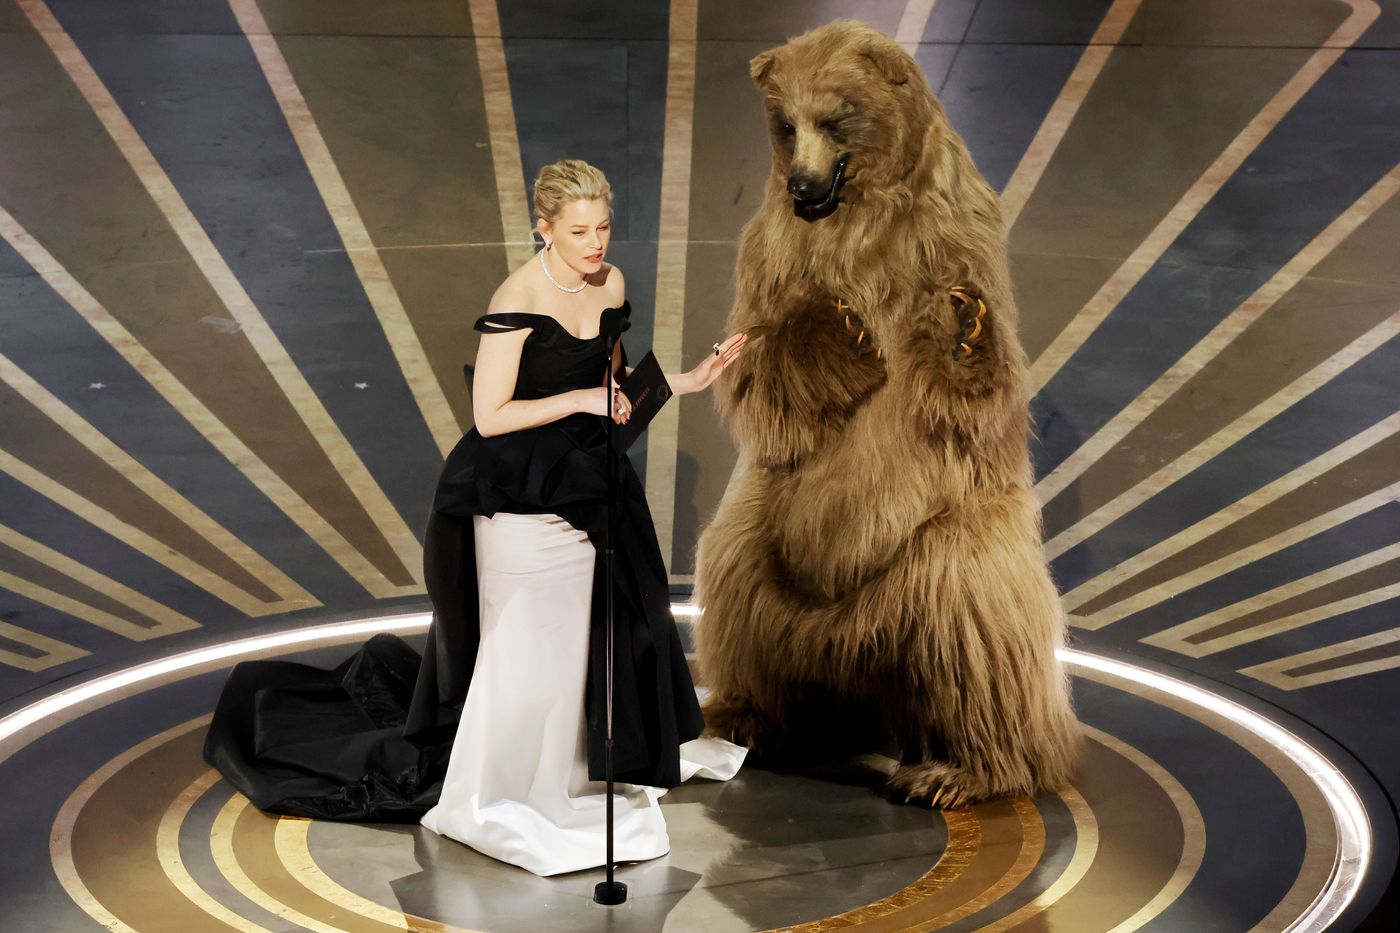 Oscars 2023: Top show moments – New York Daily News